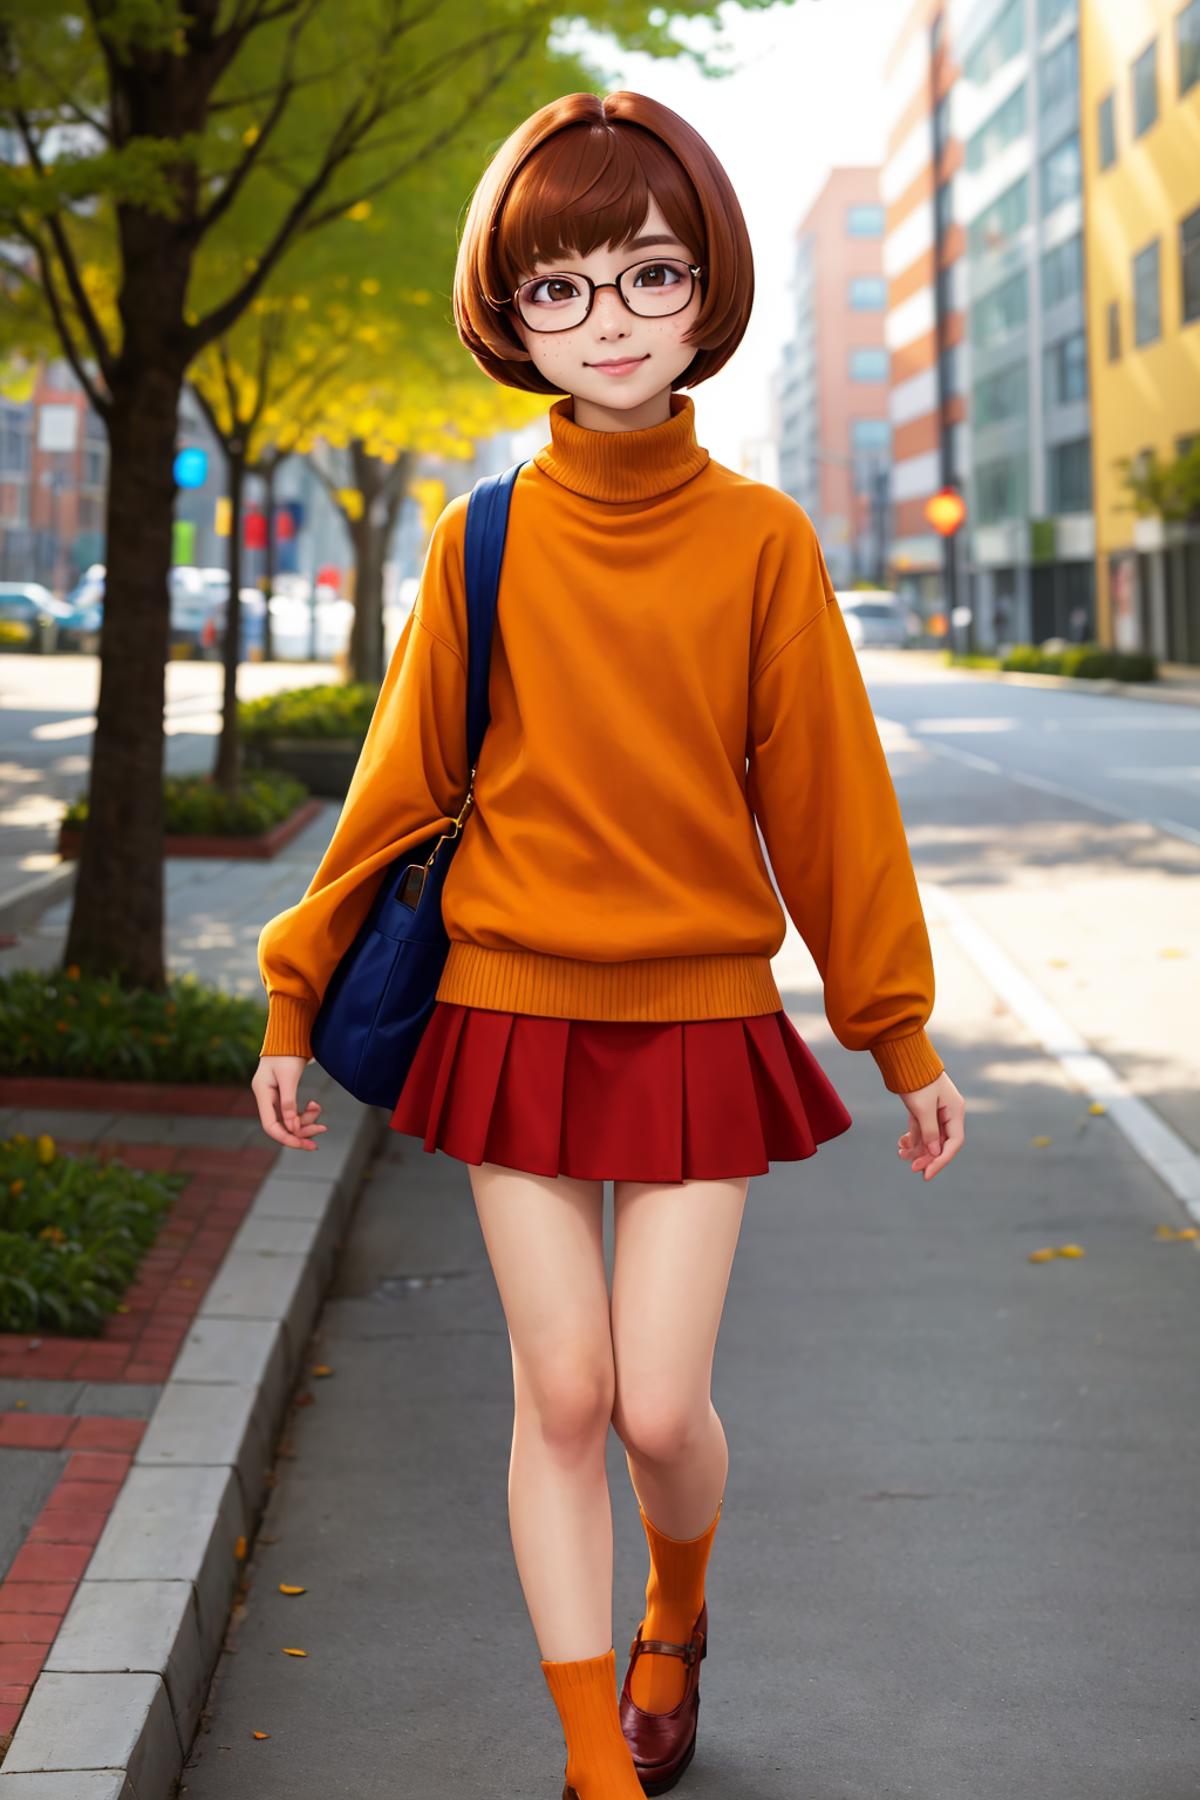 An Orange Sweater and Red Skirt Girl Walking on the Sidewalk